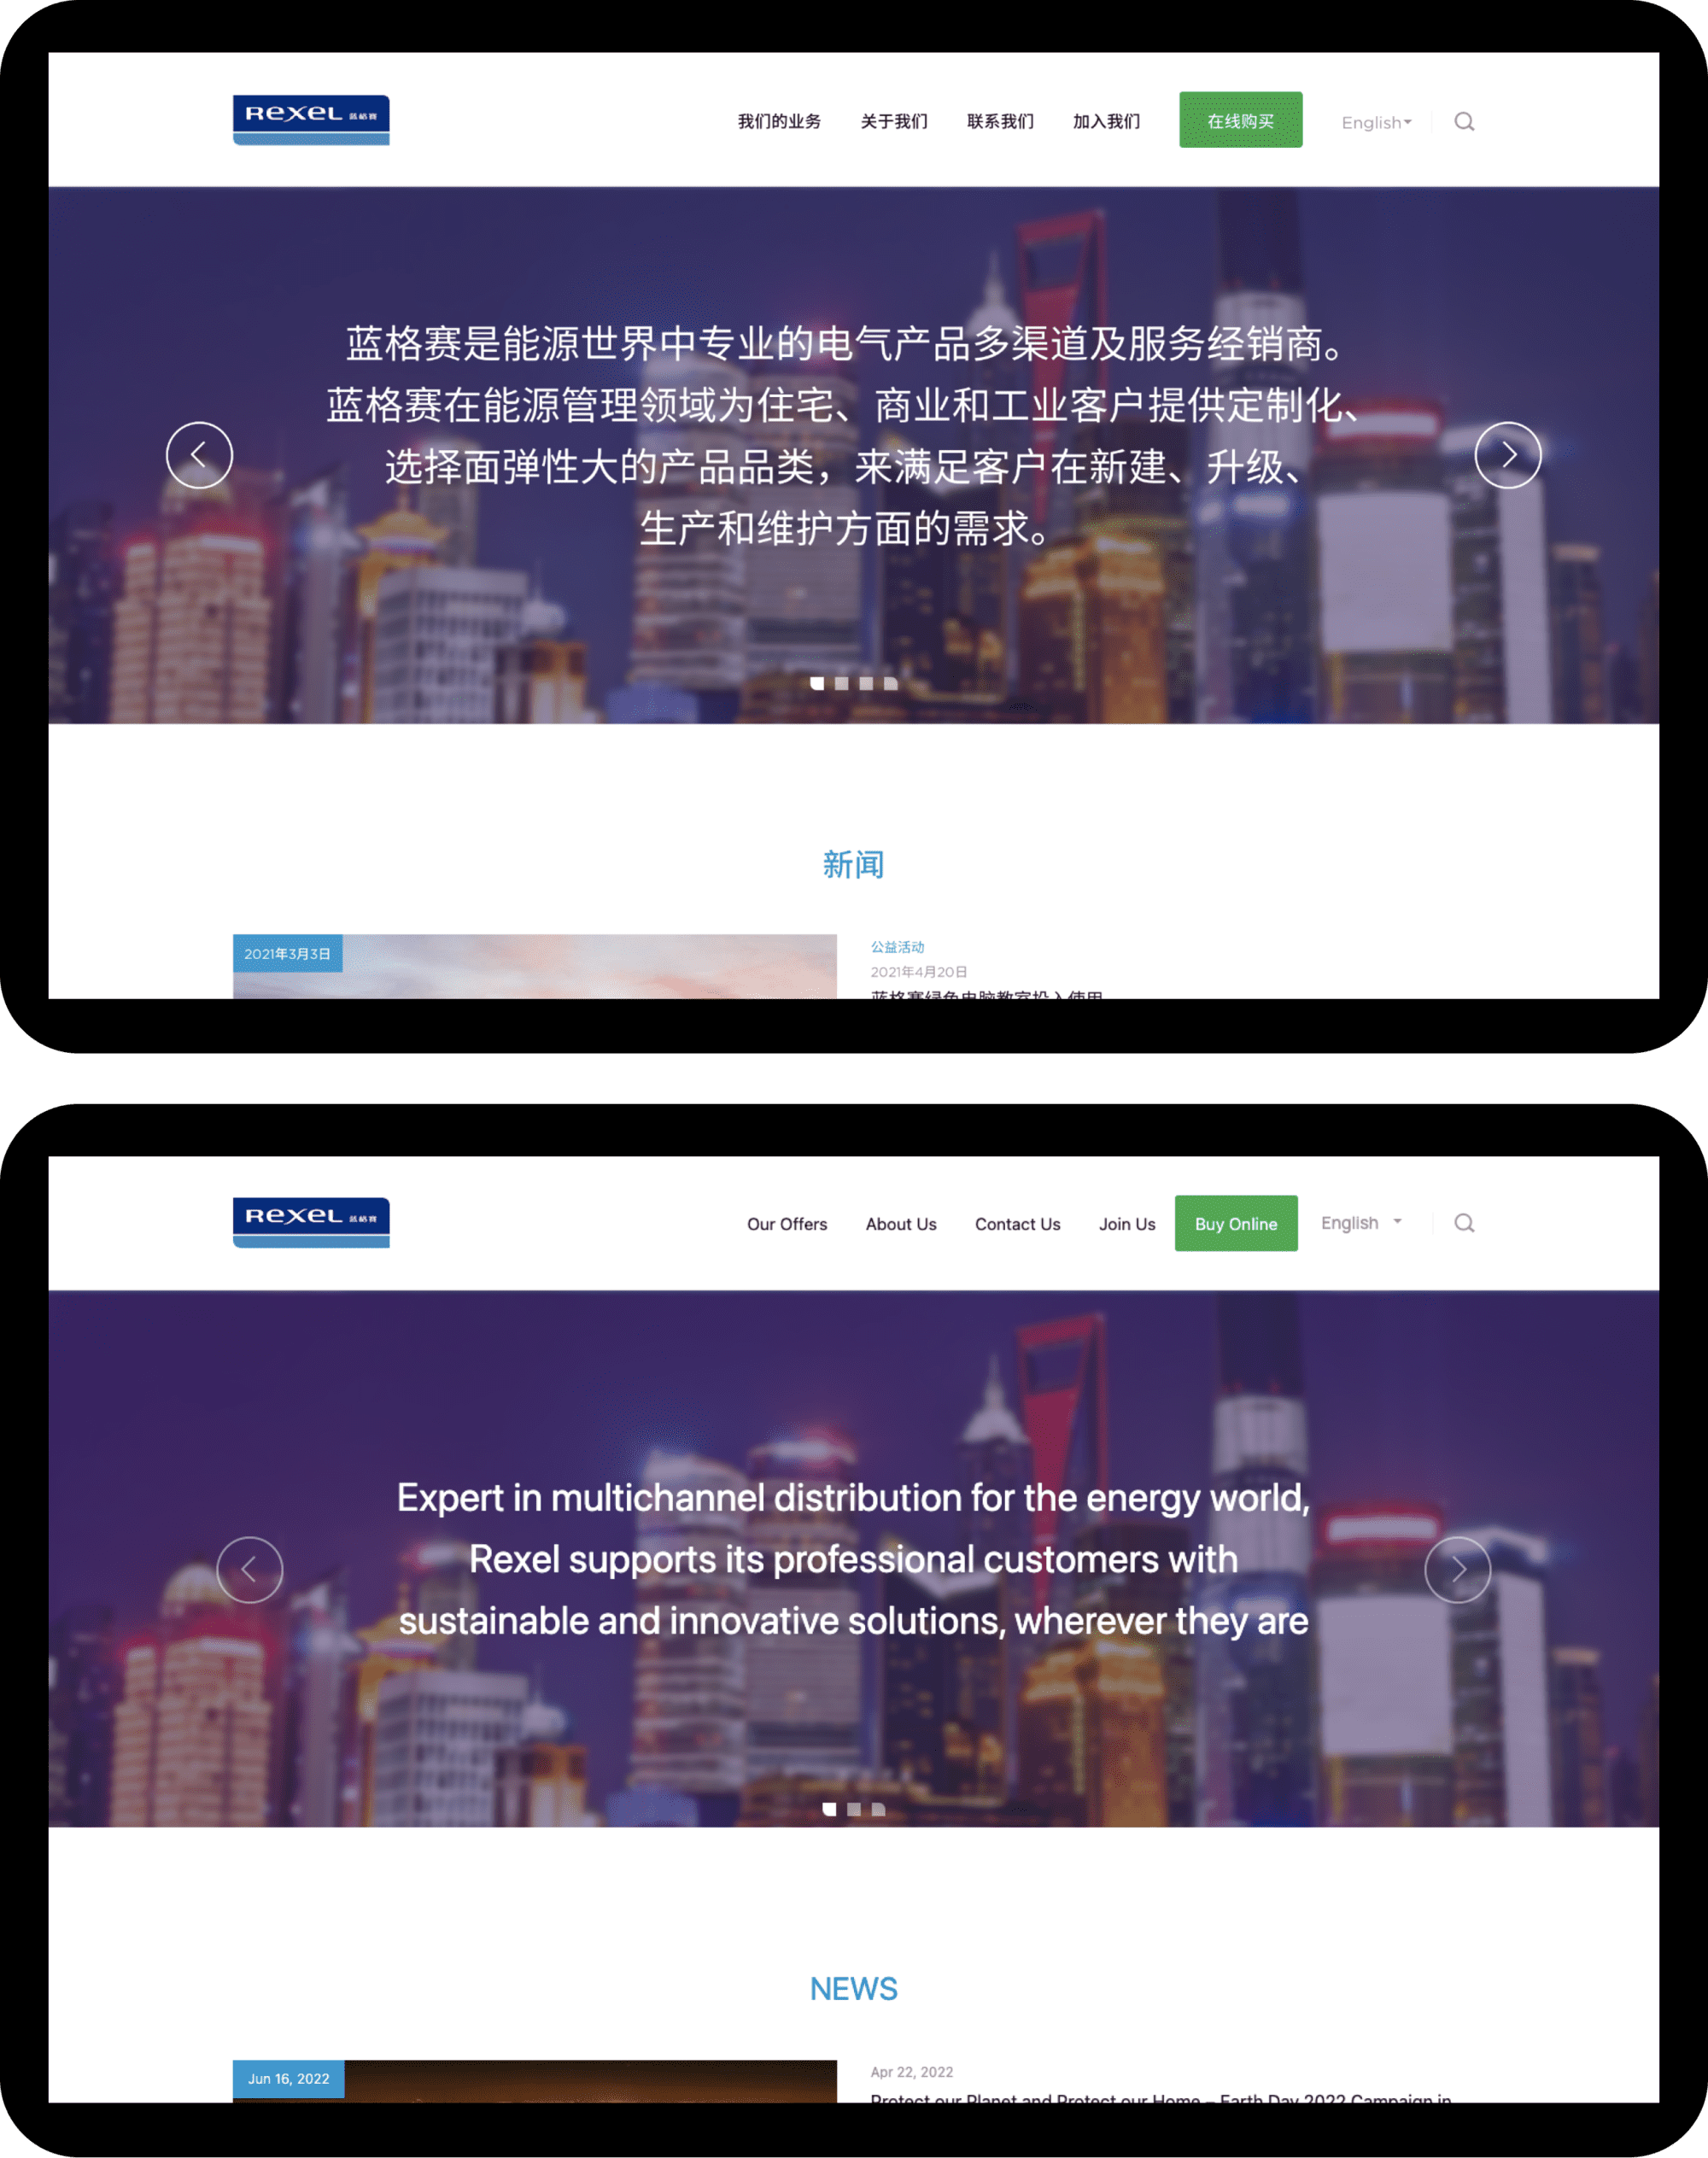 The Homepage of Rexel's multi-lingual website in Chinese and English